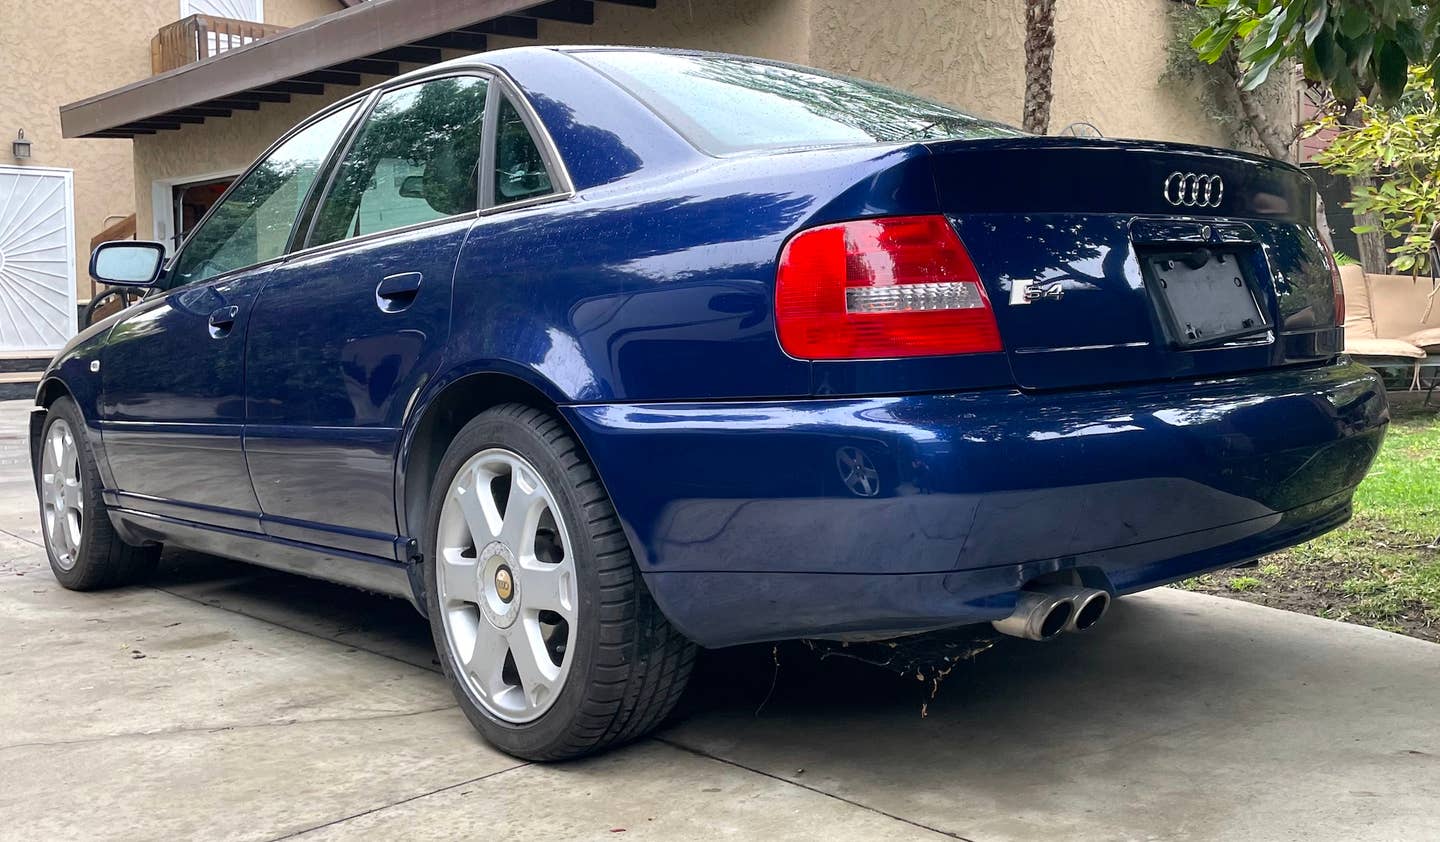 The 2002 B5 Audi S4 on The Drive